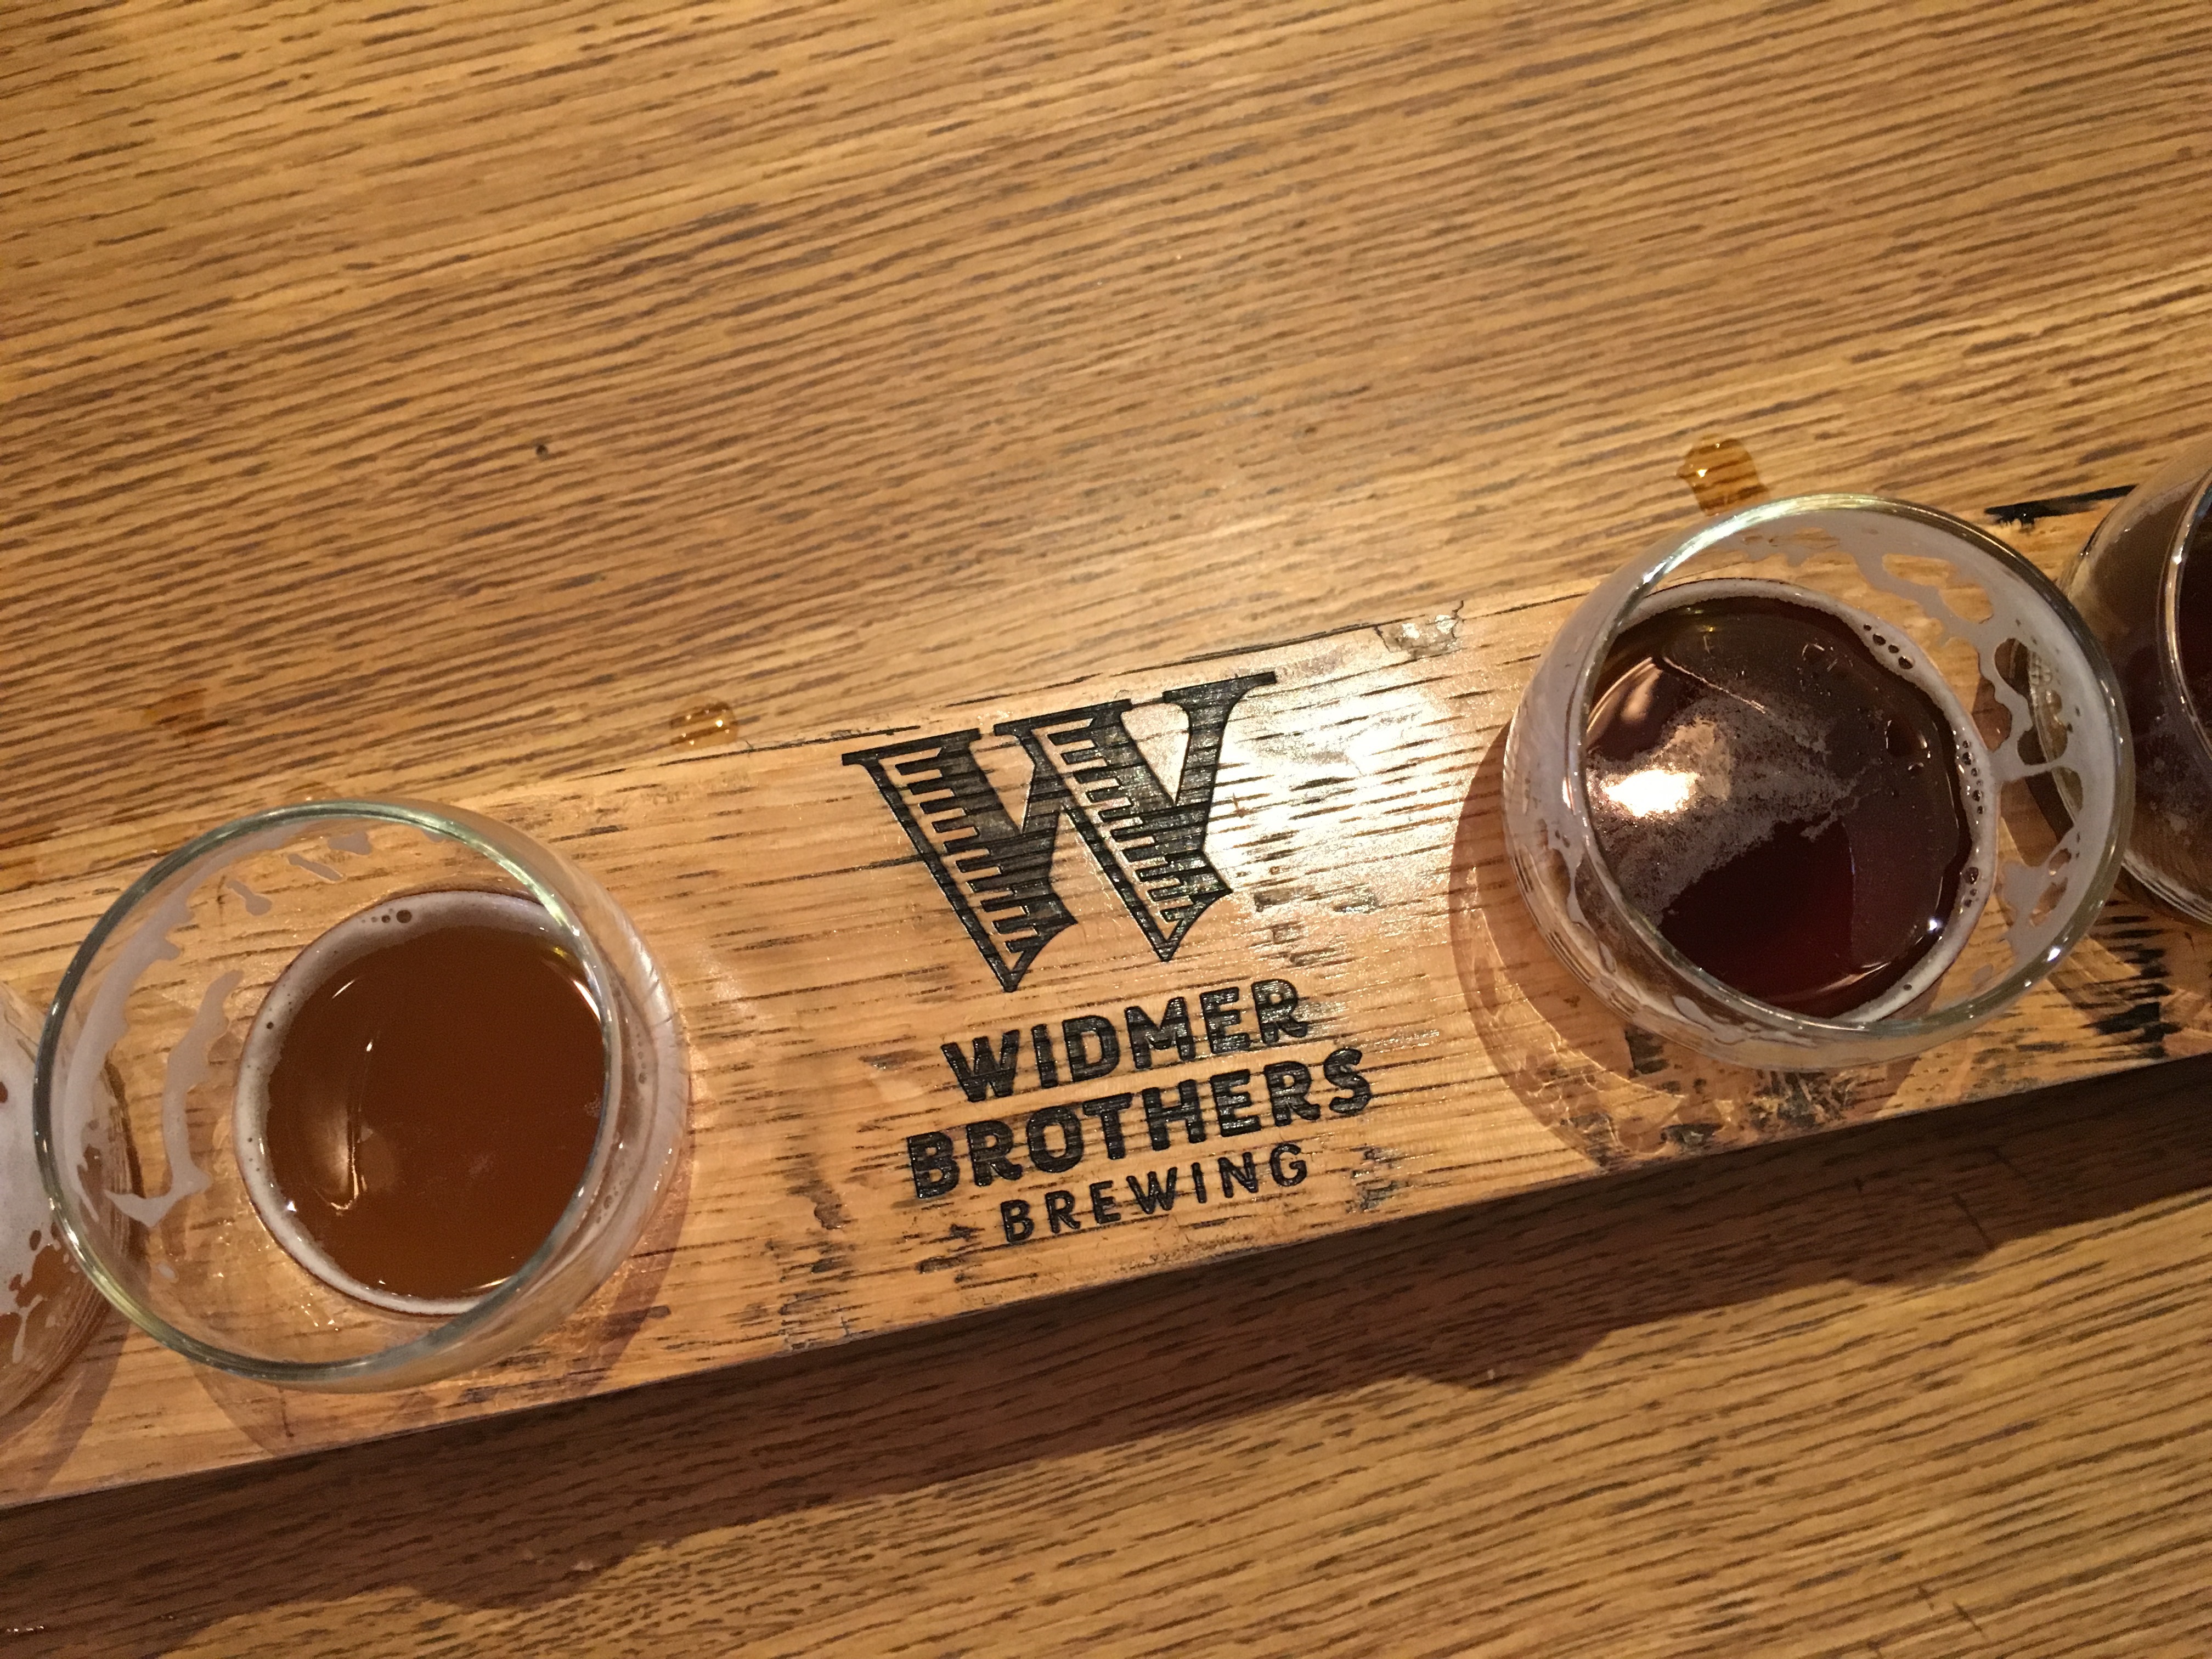 Taster tray of beers brewed on the Widmer Brothers Brewing Innovation Brewery.